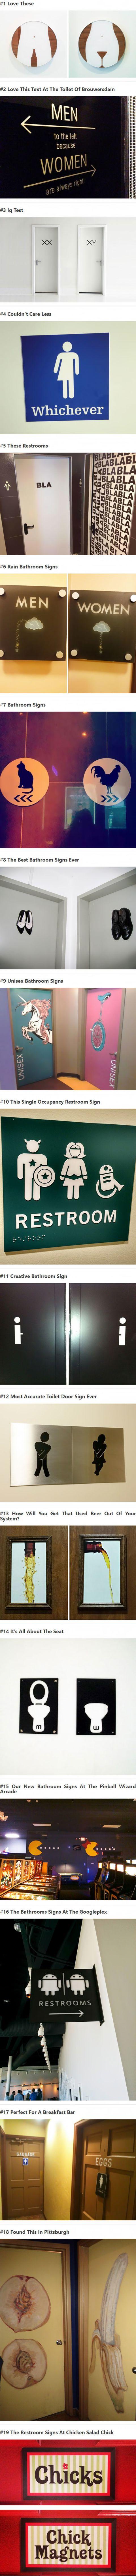 19+Times+Bathroom+Signs+Get+Really+Creative